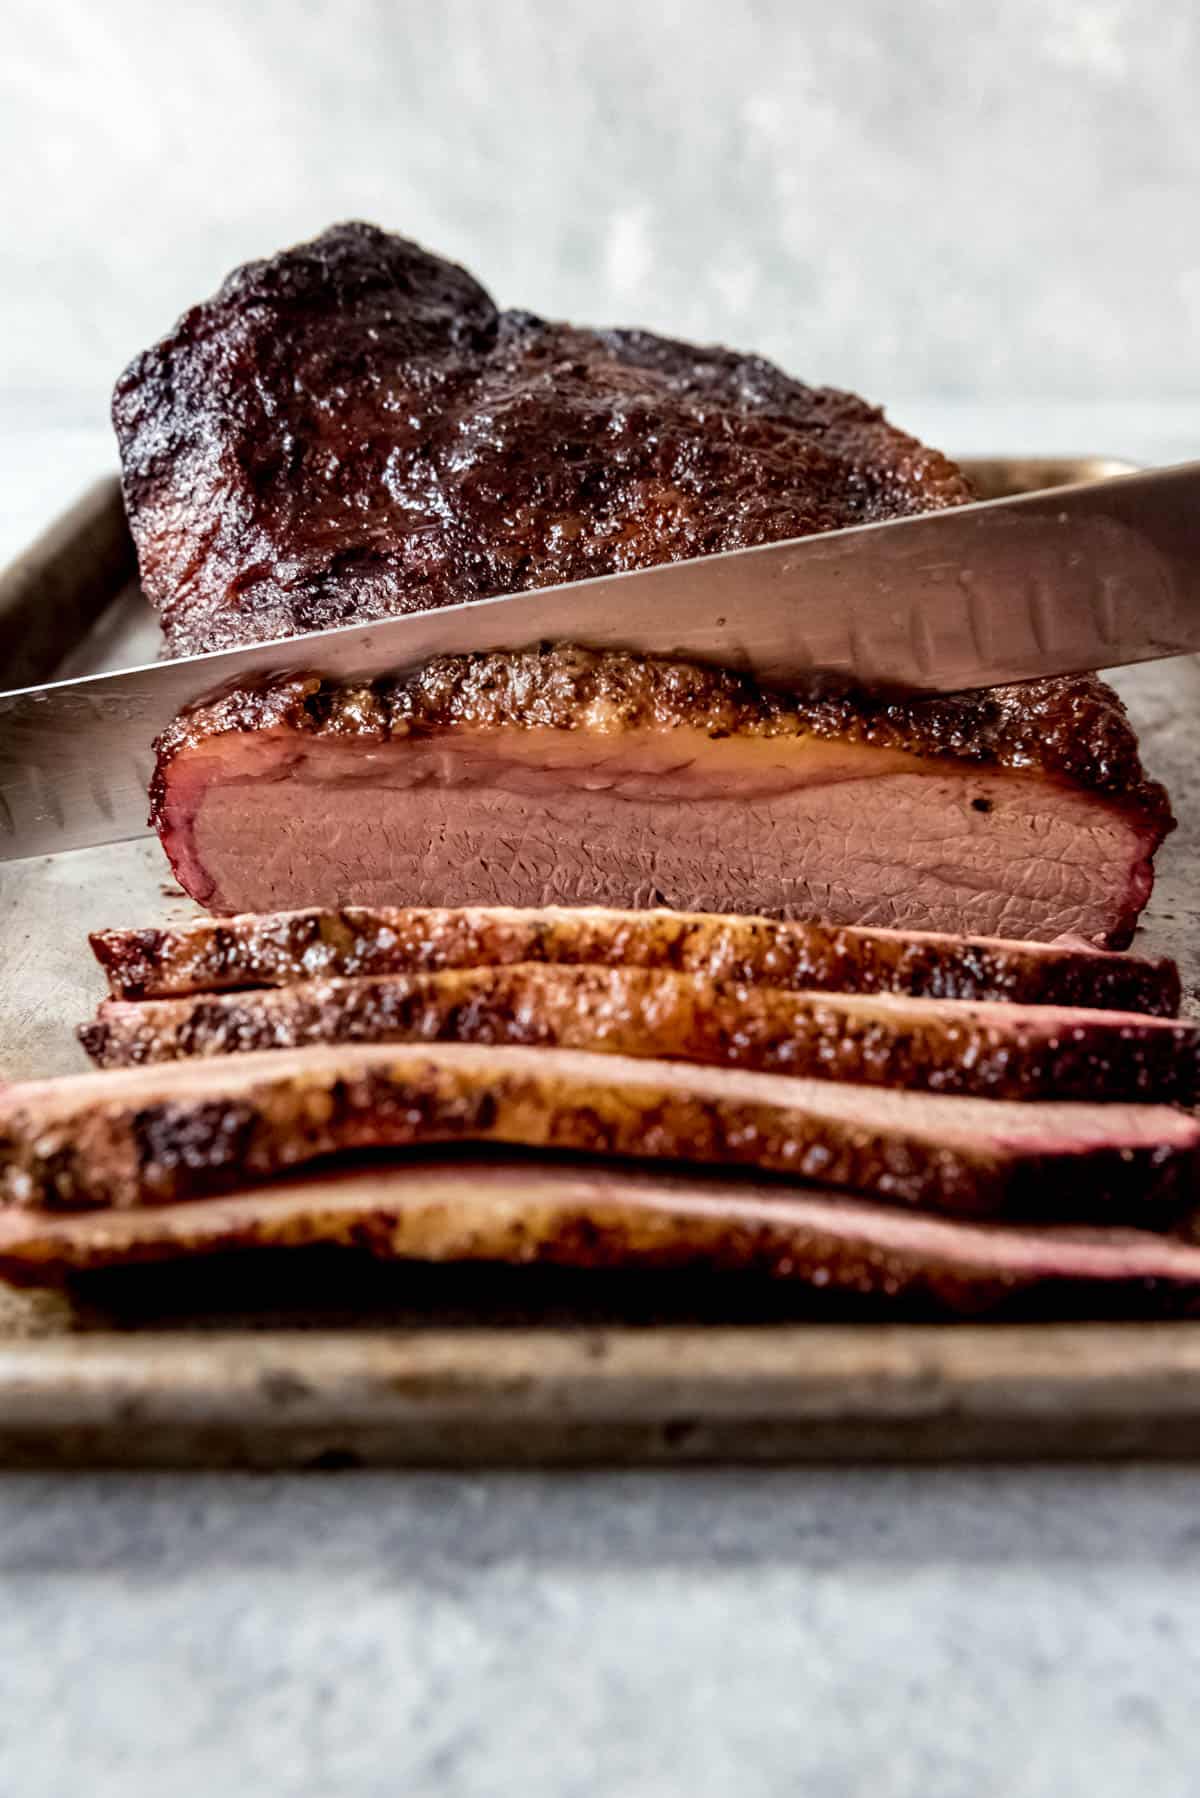 An image of a Texas smoked brisket being sliced.